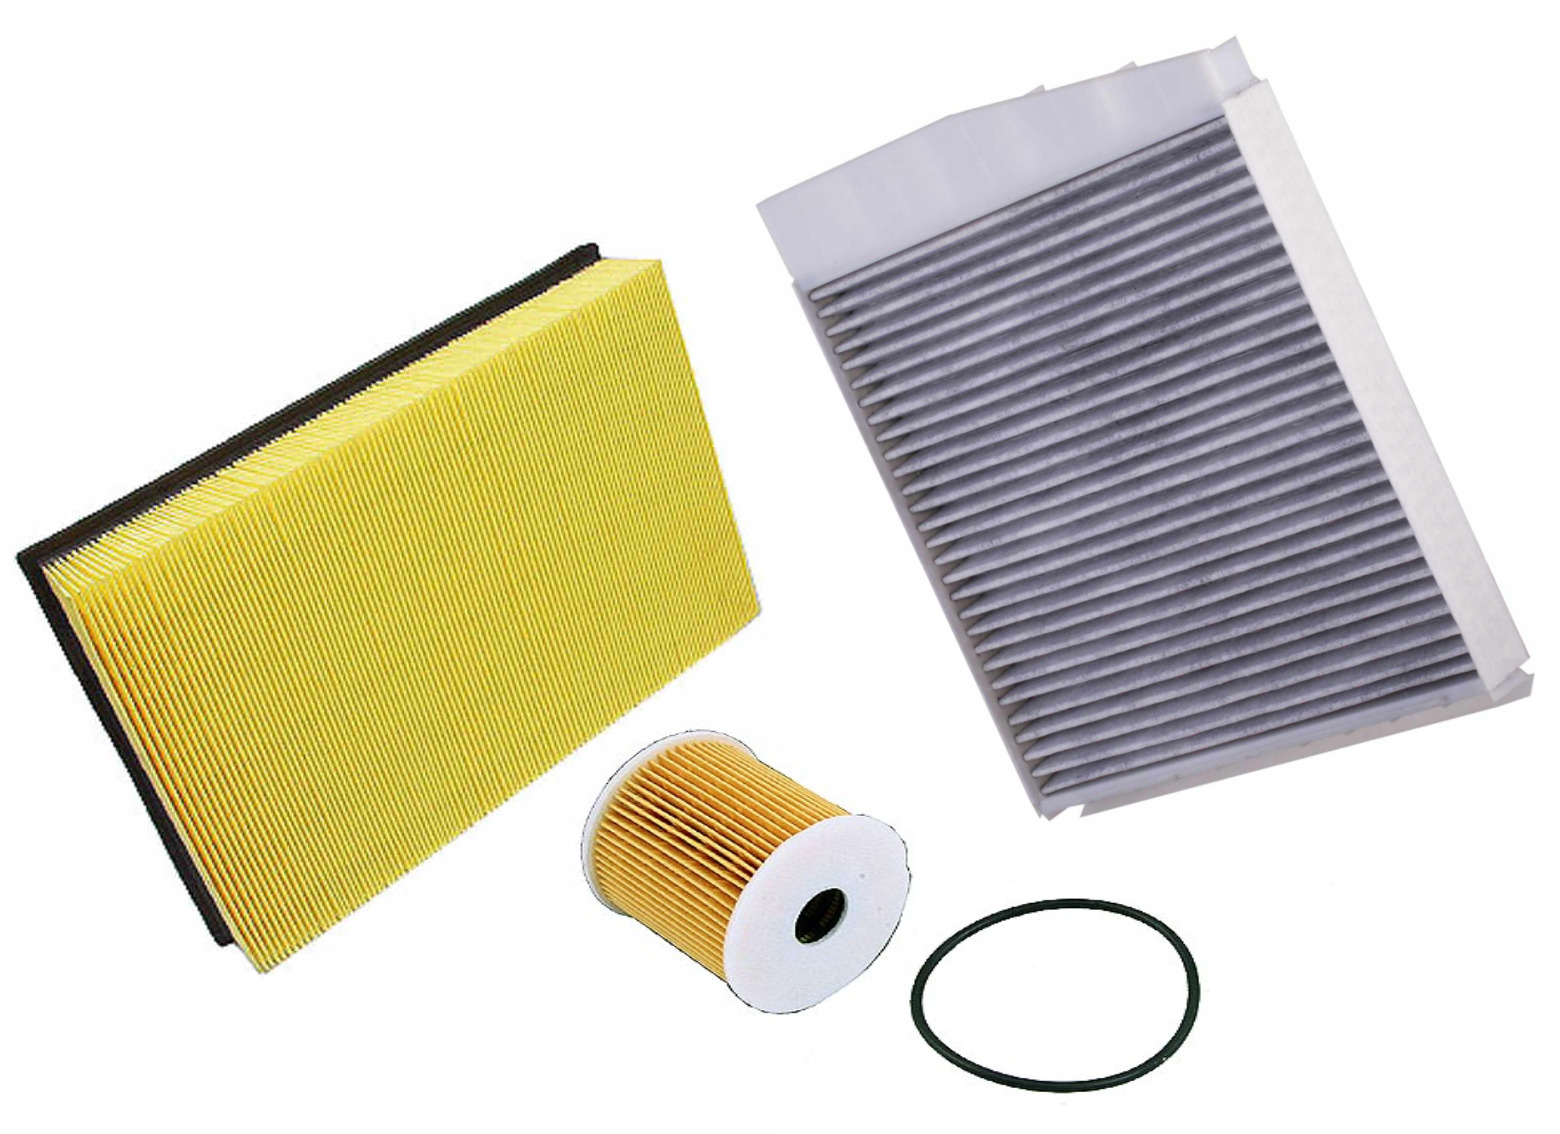 Air Filter Oil Filter AC Cabin Filter Carbon for Volvo S60 S80 V70 XC70 01-09